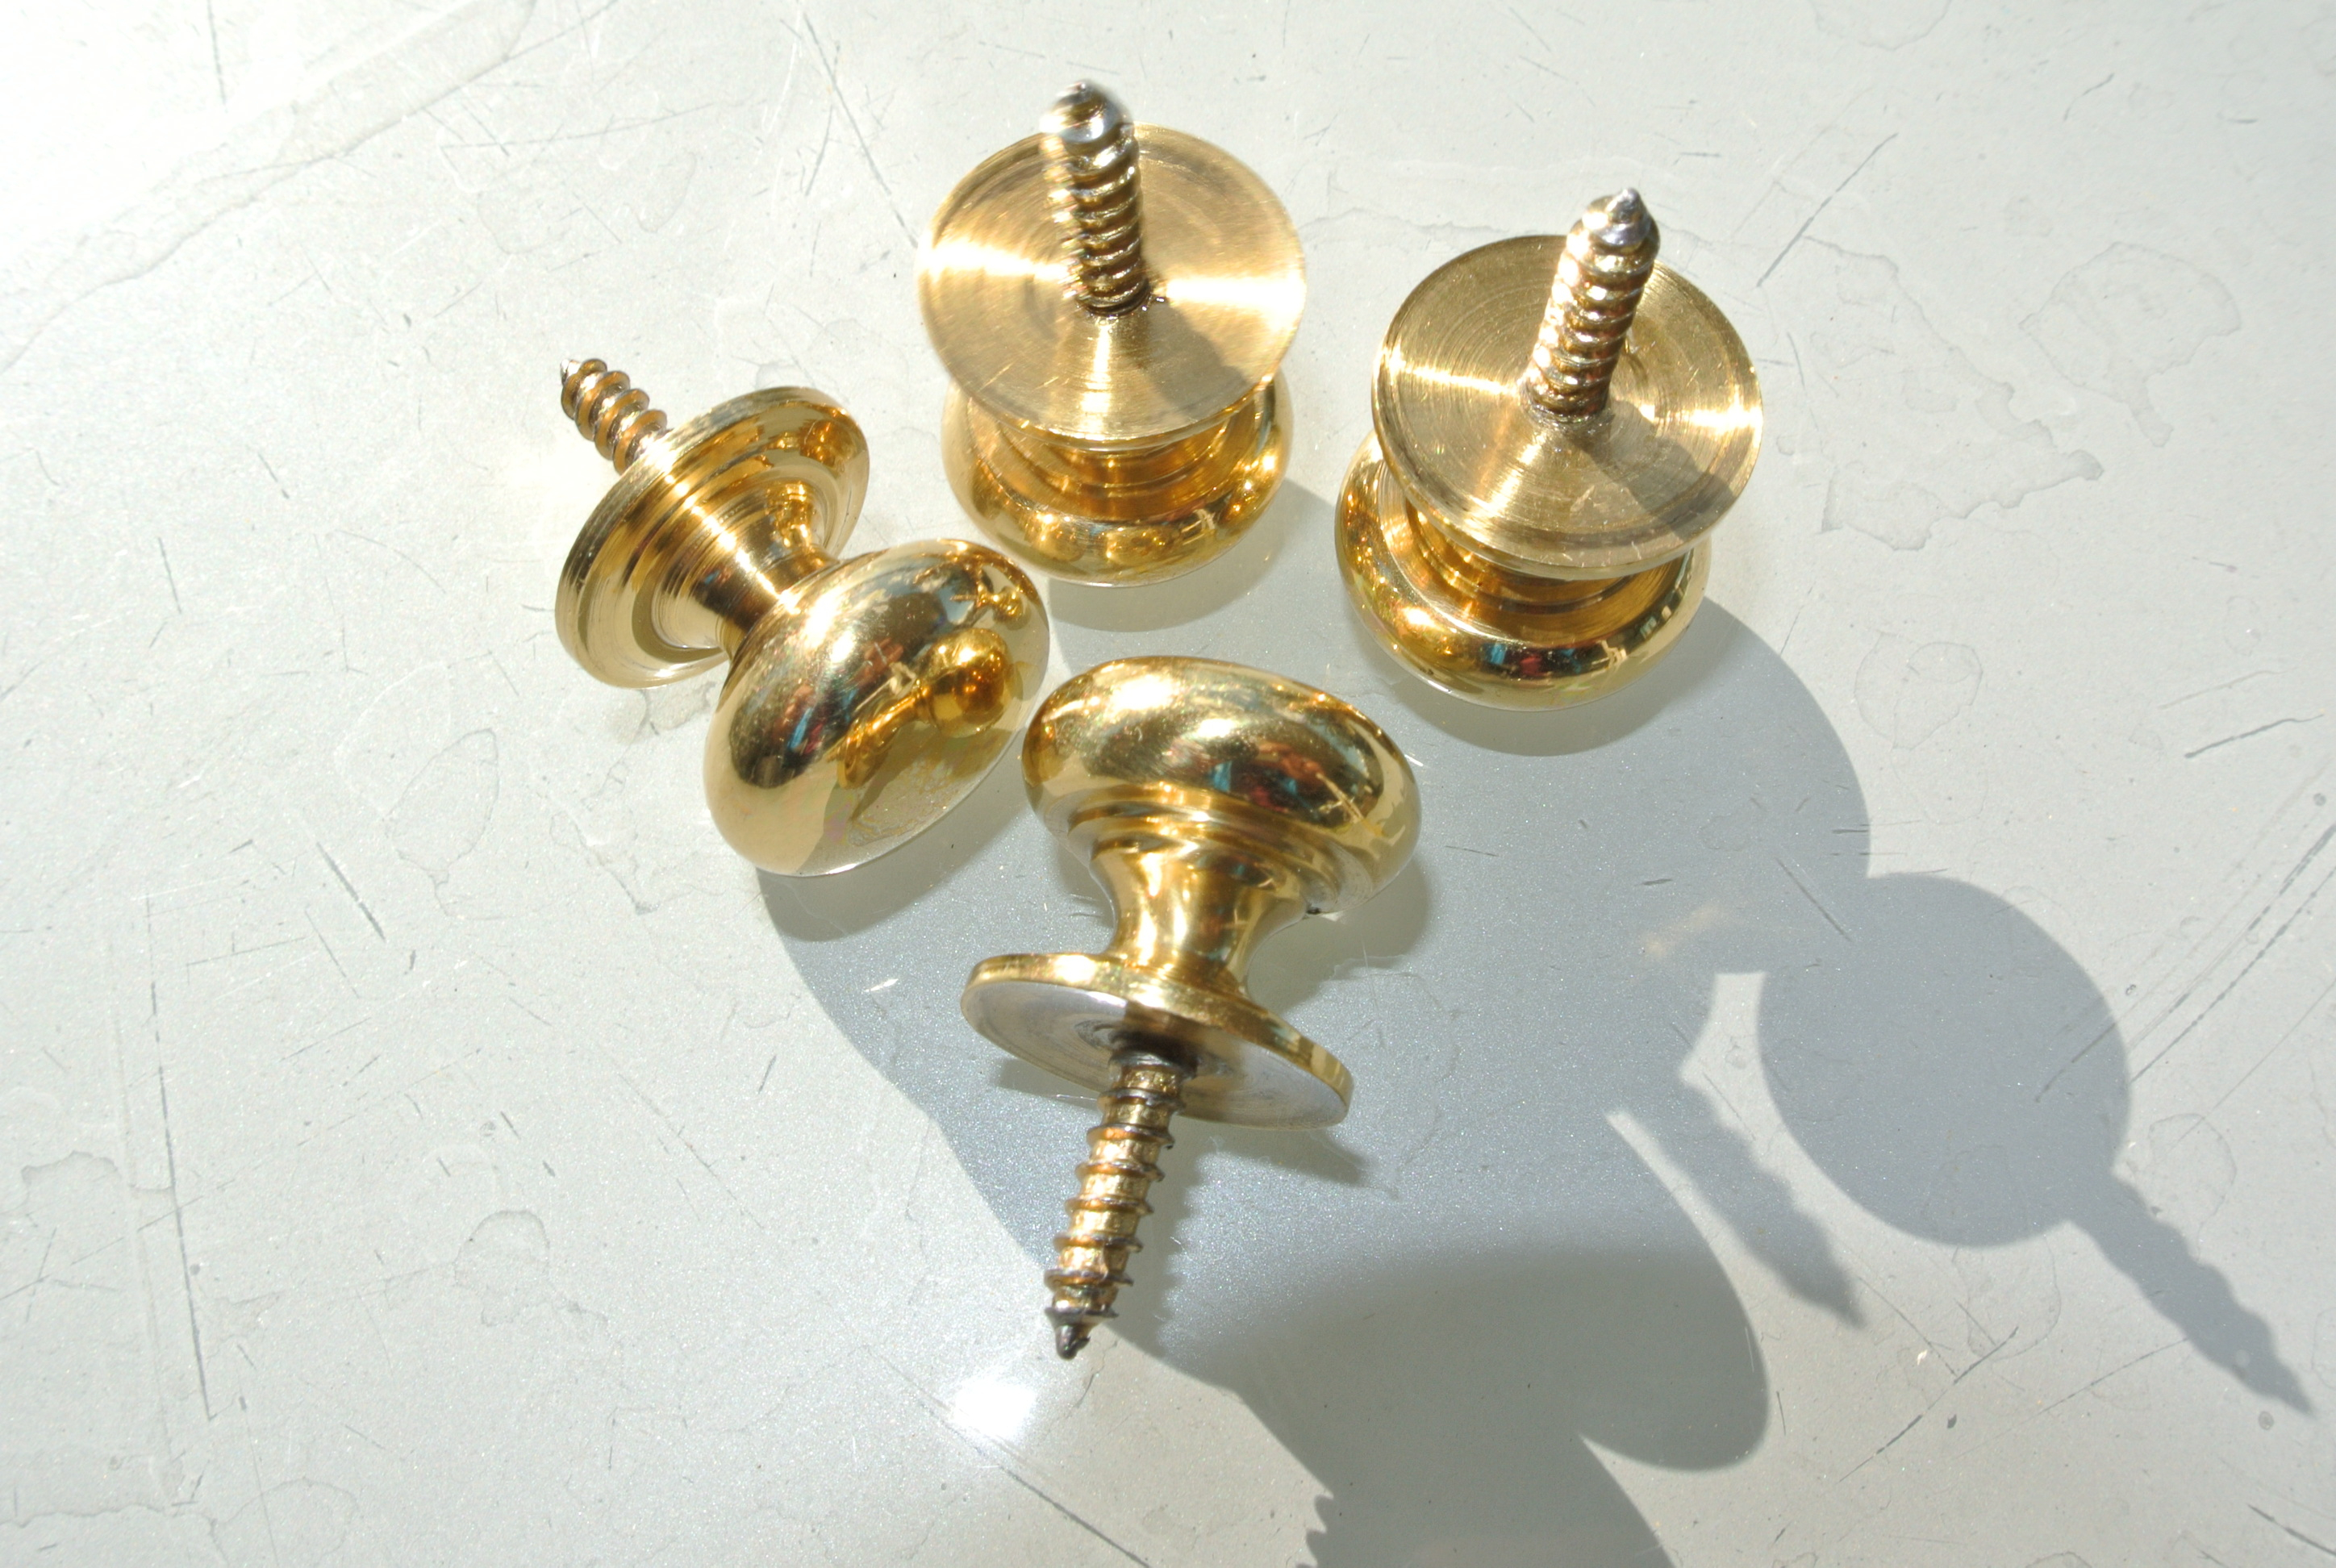 4 Very Small Screw Knobs Pulls Handles Antique Solid Heavy Brass throughout sizing 2896 X 1944